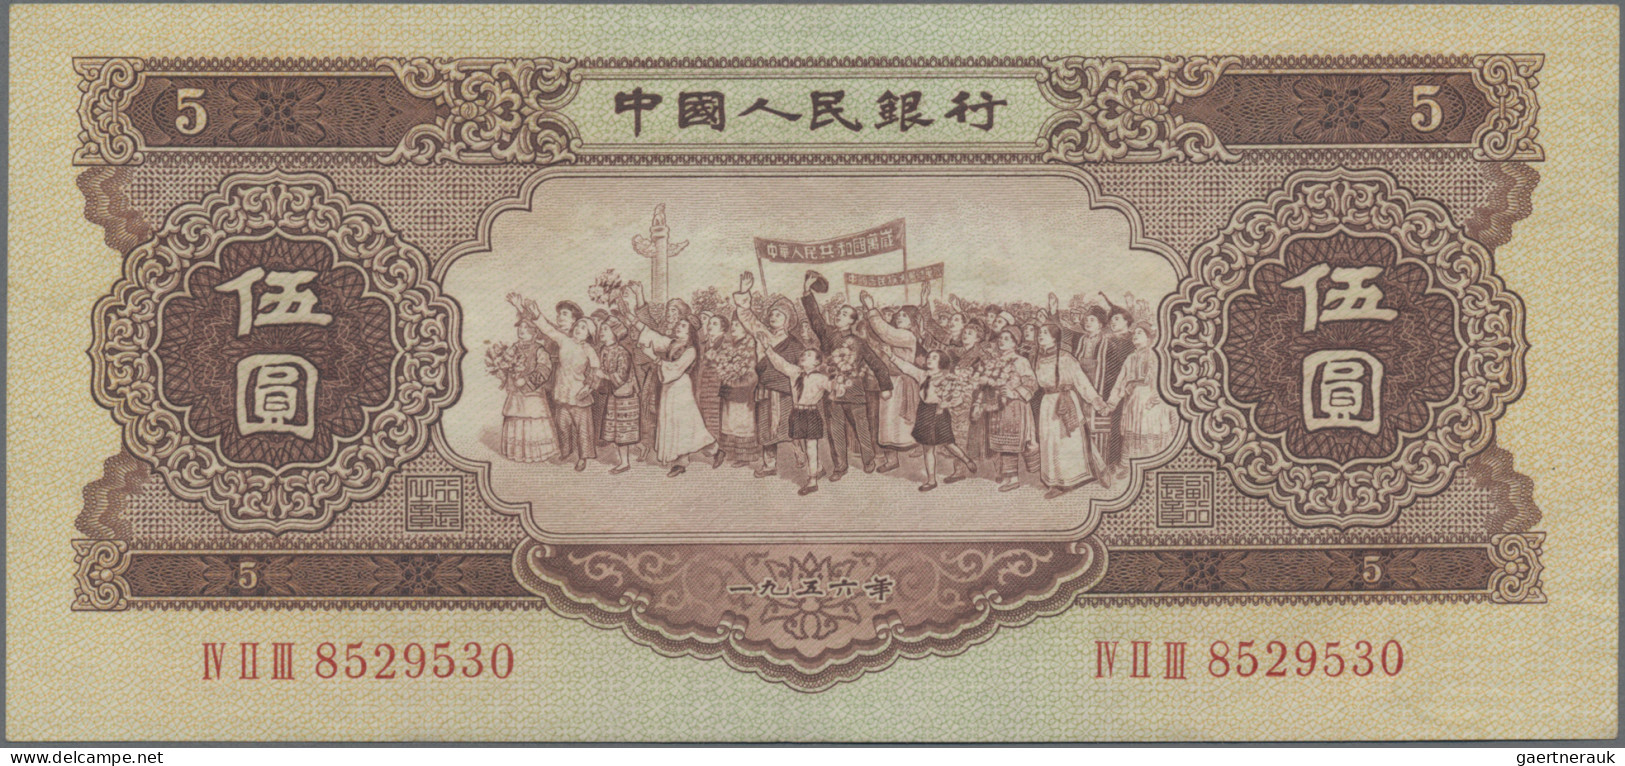 China: Peoples Republic Of China 1956 Second Series Pair With 1 Yuan (P:871, UNC - China